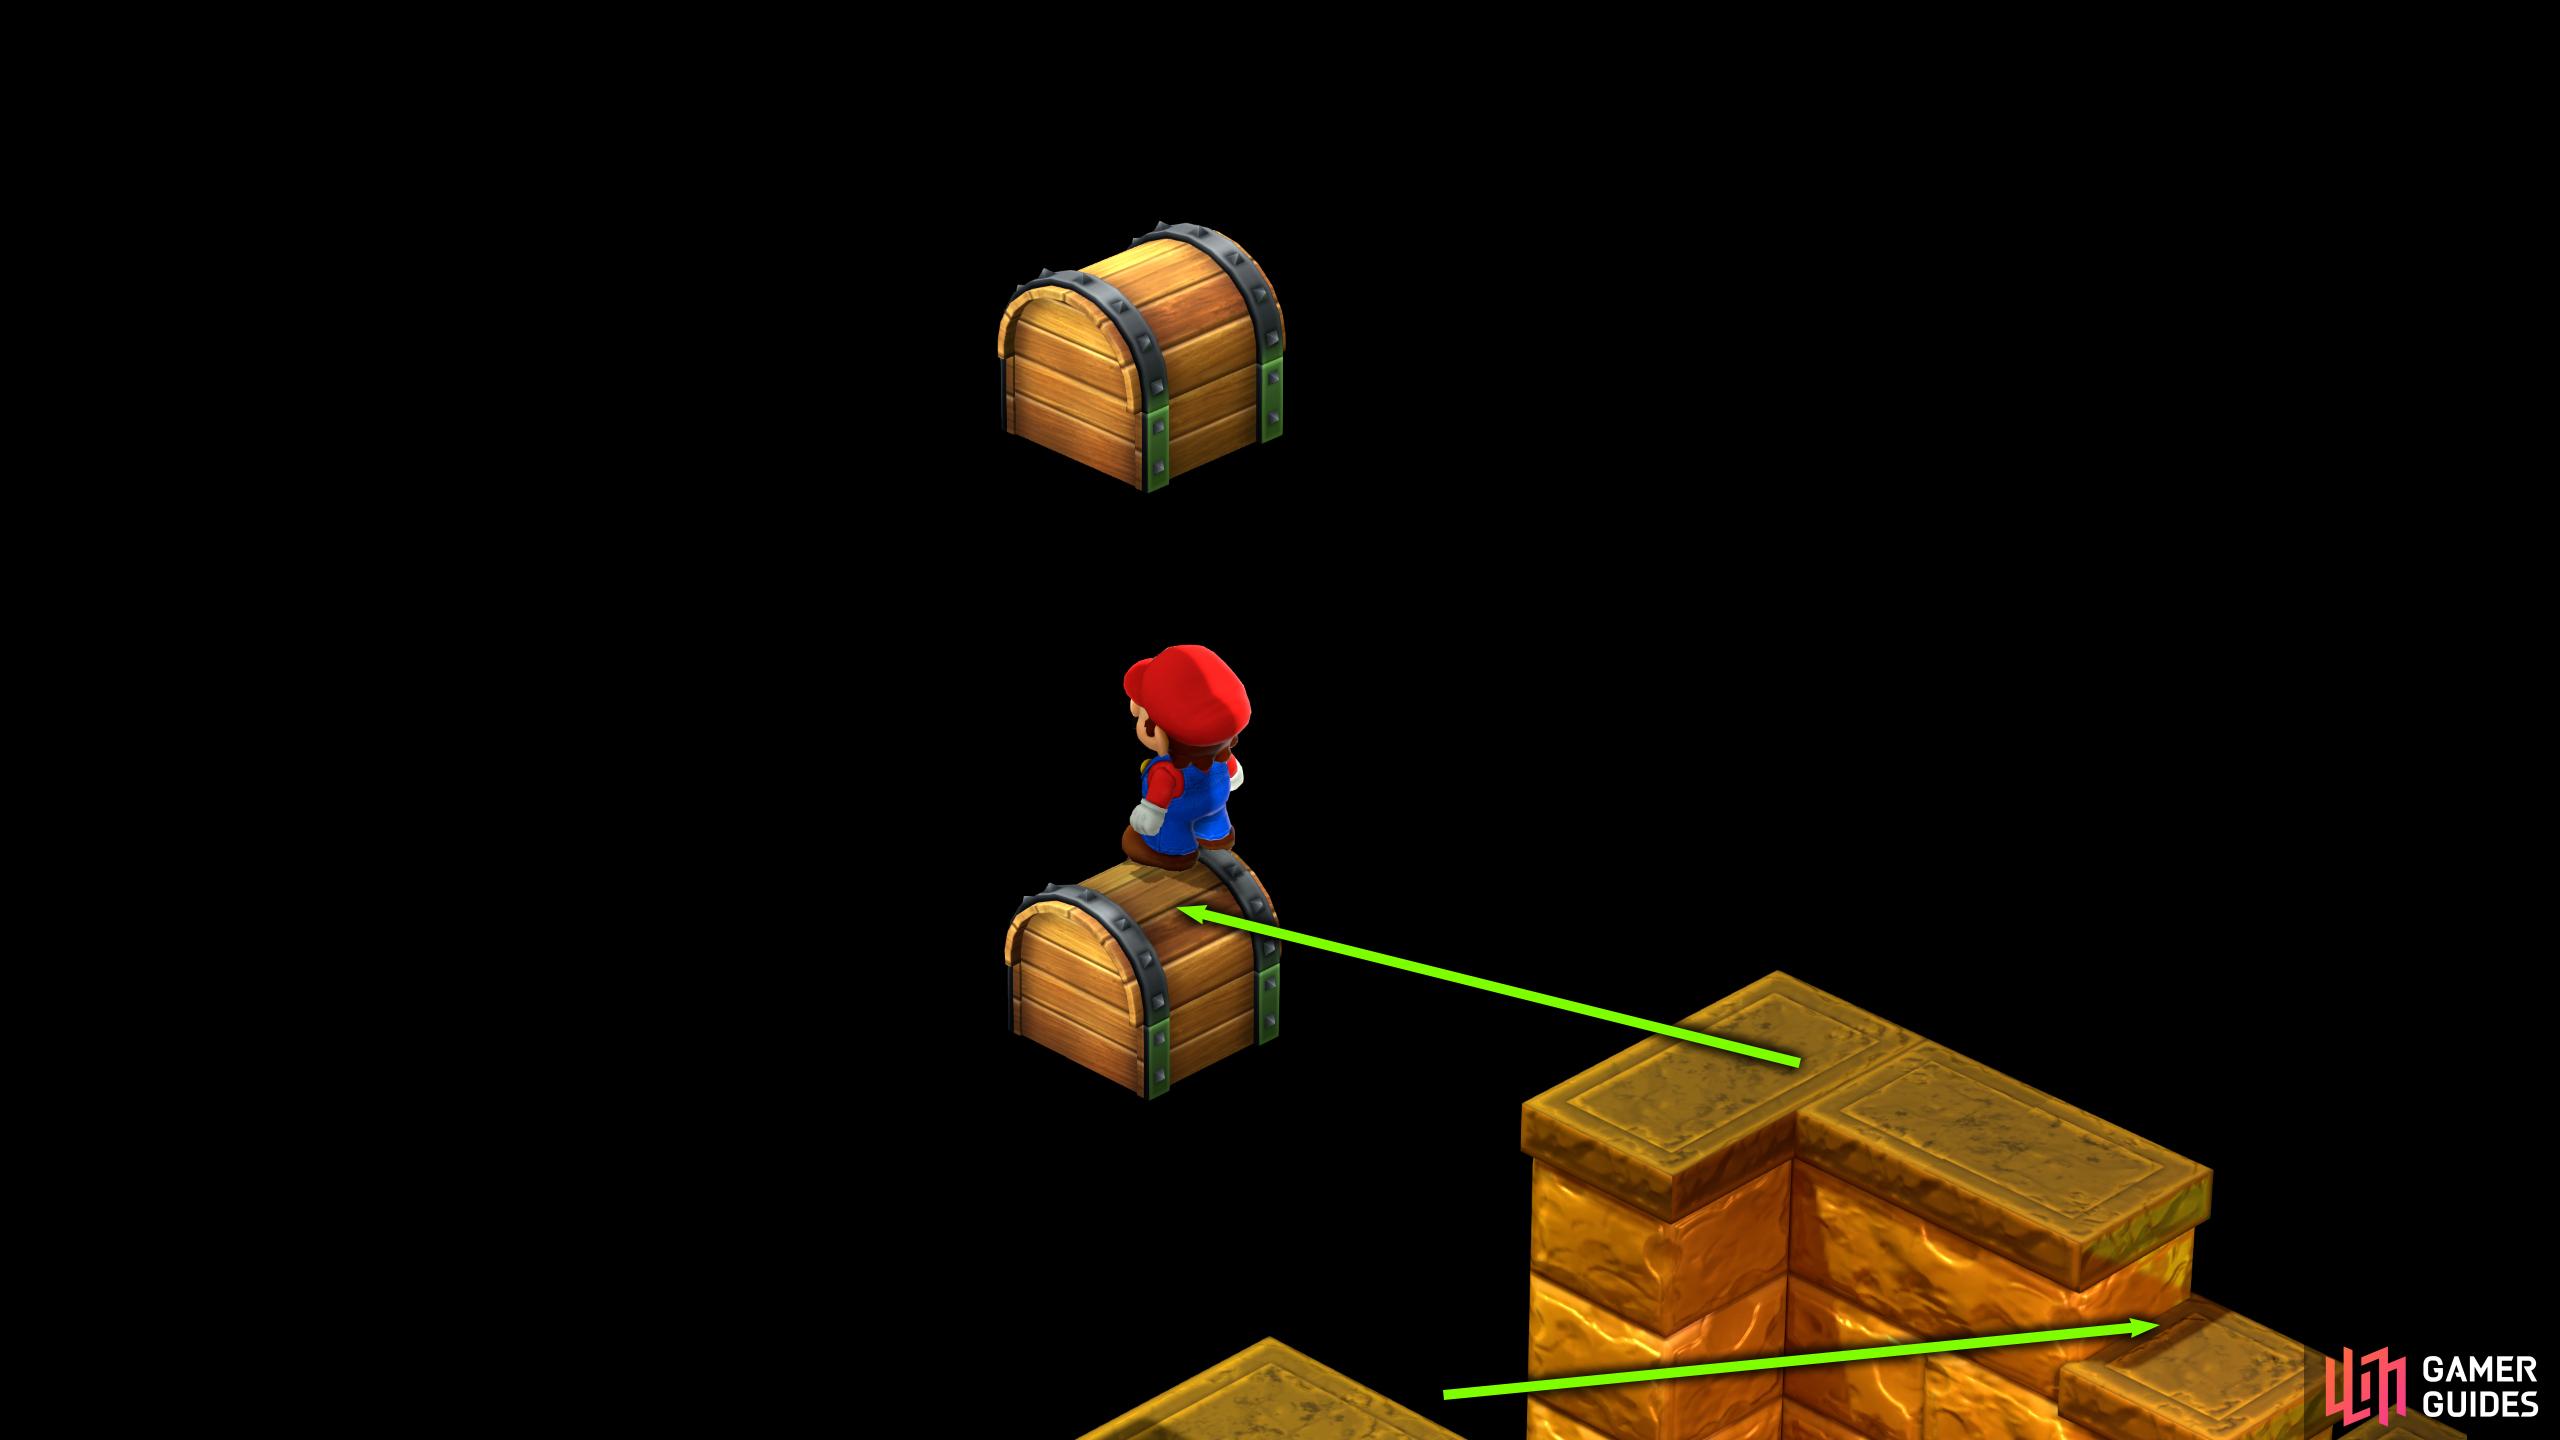 Hidden Treasure 1: Use the ledge to the east to jump on the chest. From there, jump in the air for treasure 1.